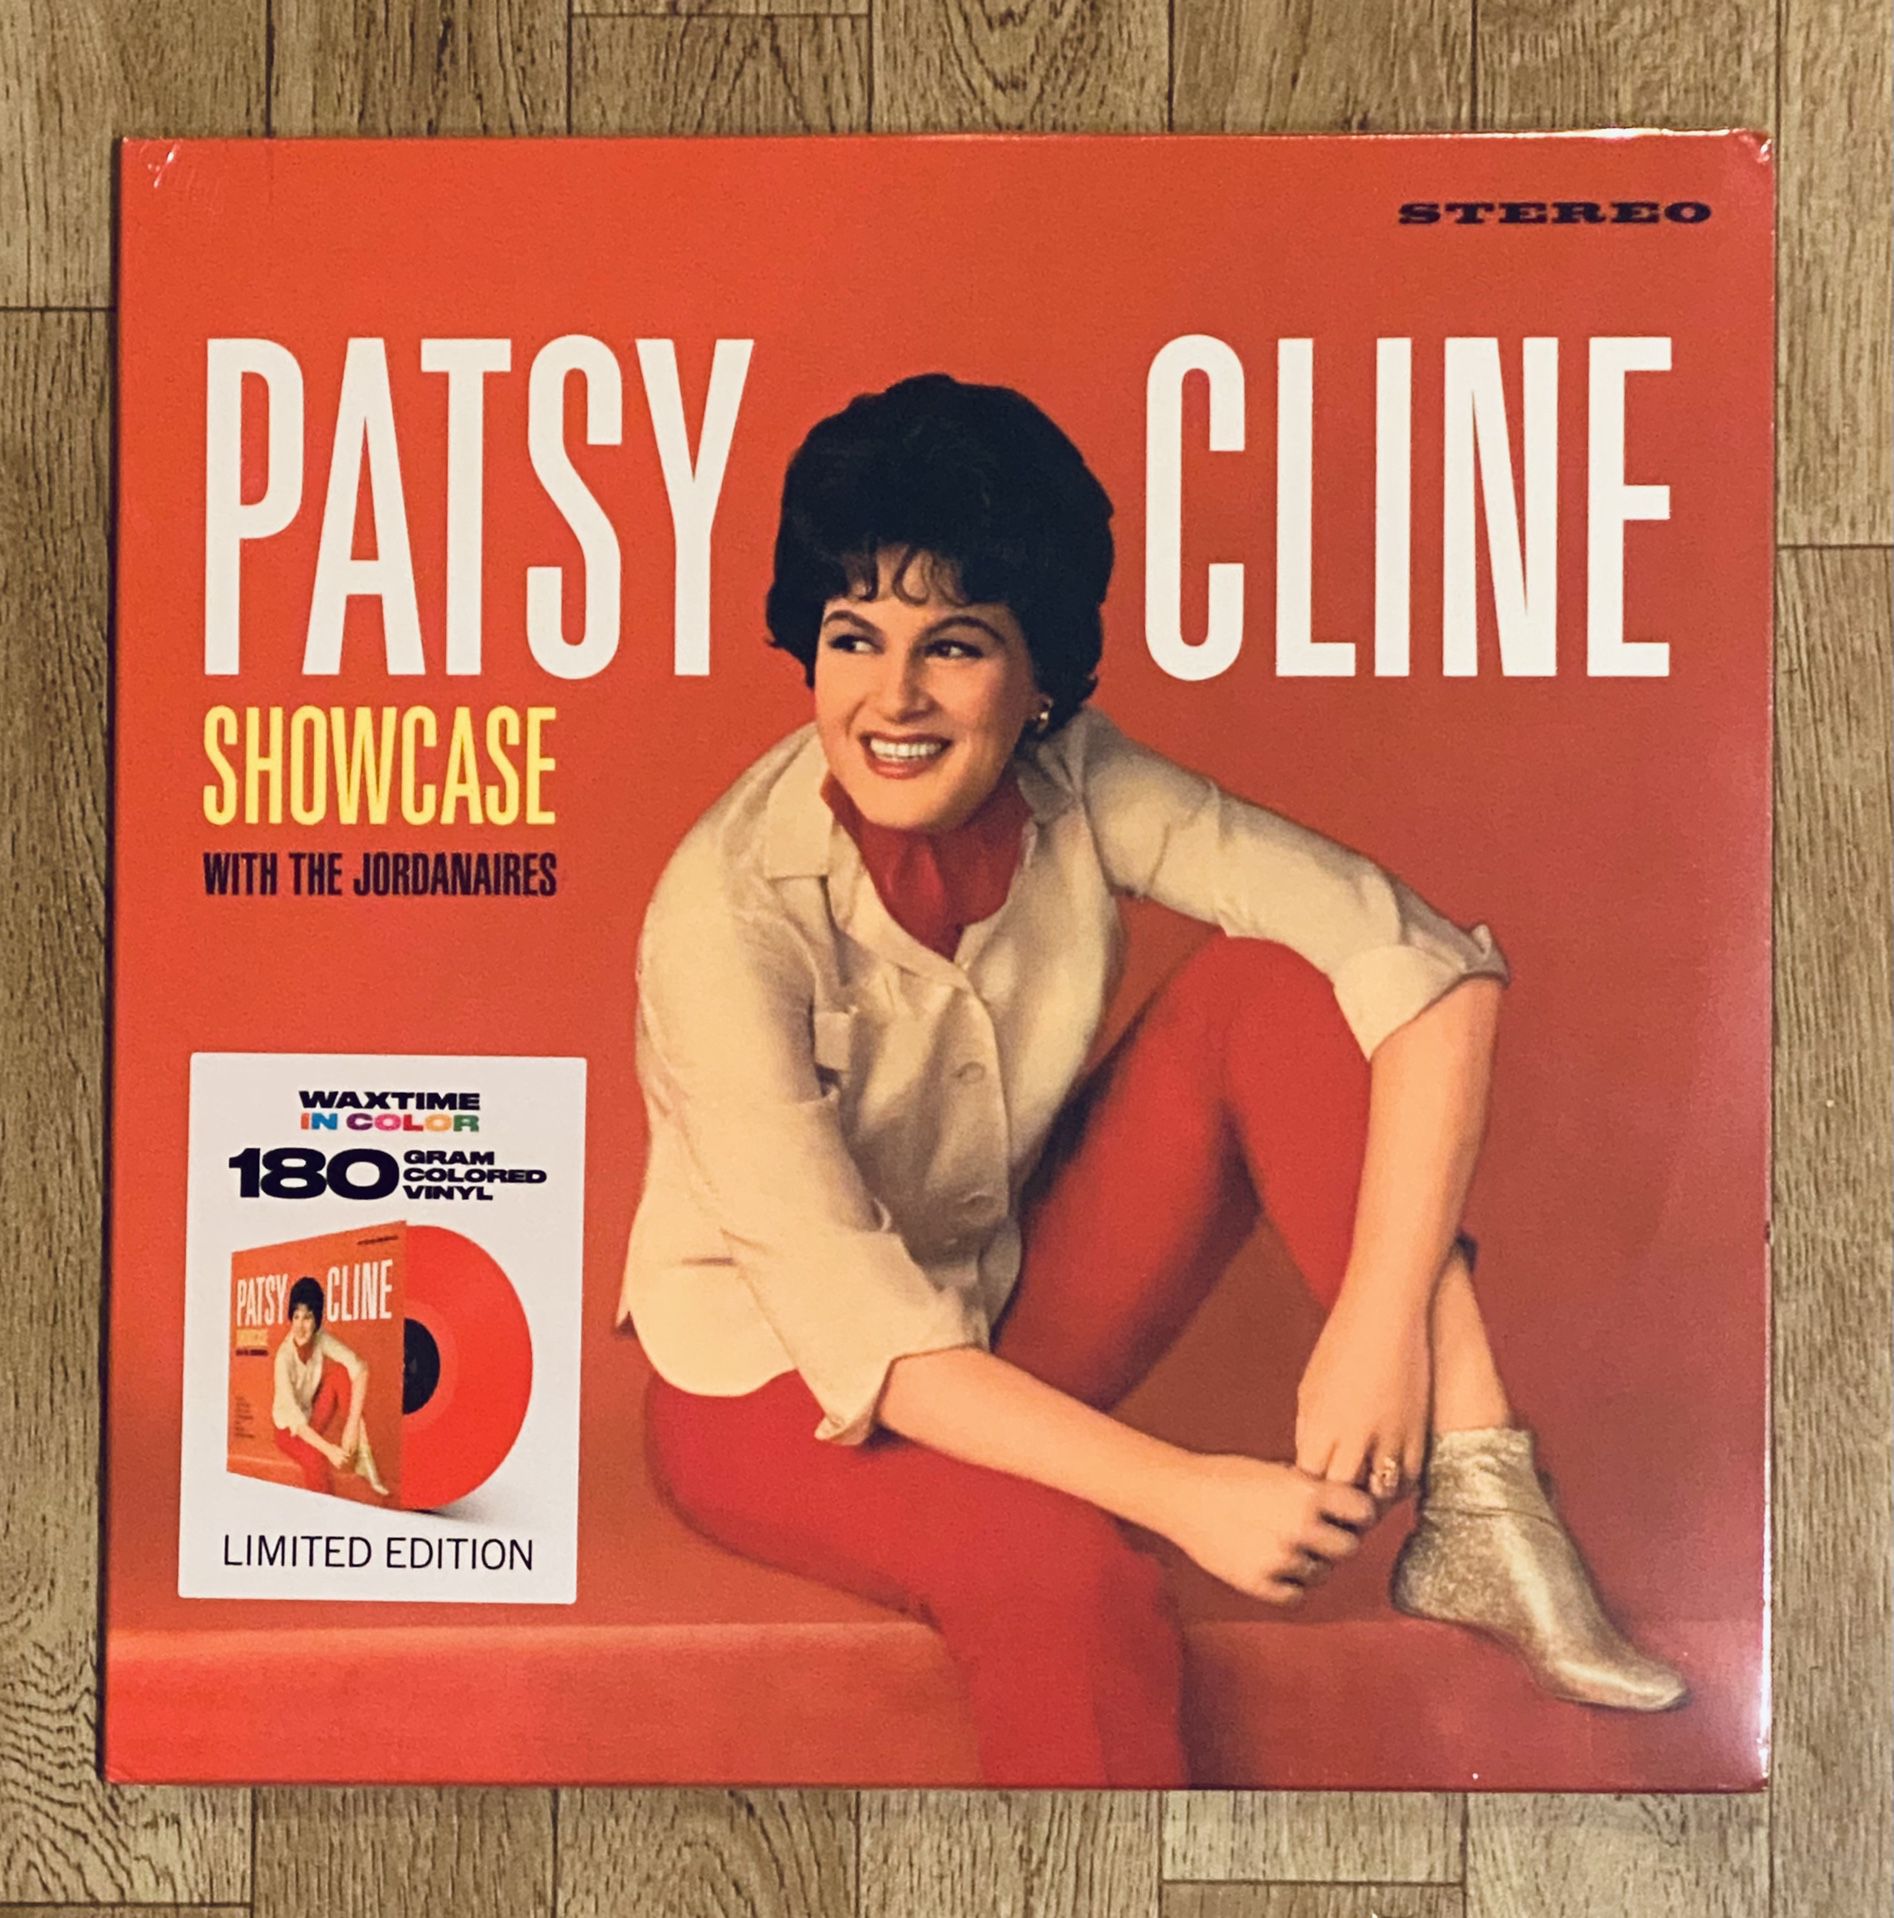 Energize span Muskuløs Patsy Cline Vinyl Record 180gram - Showcase - New Sealed for Sale in  Seattle, WA - OfferUp